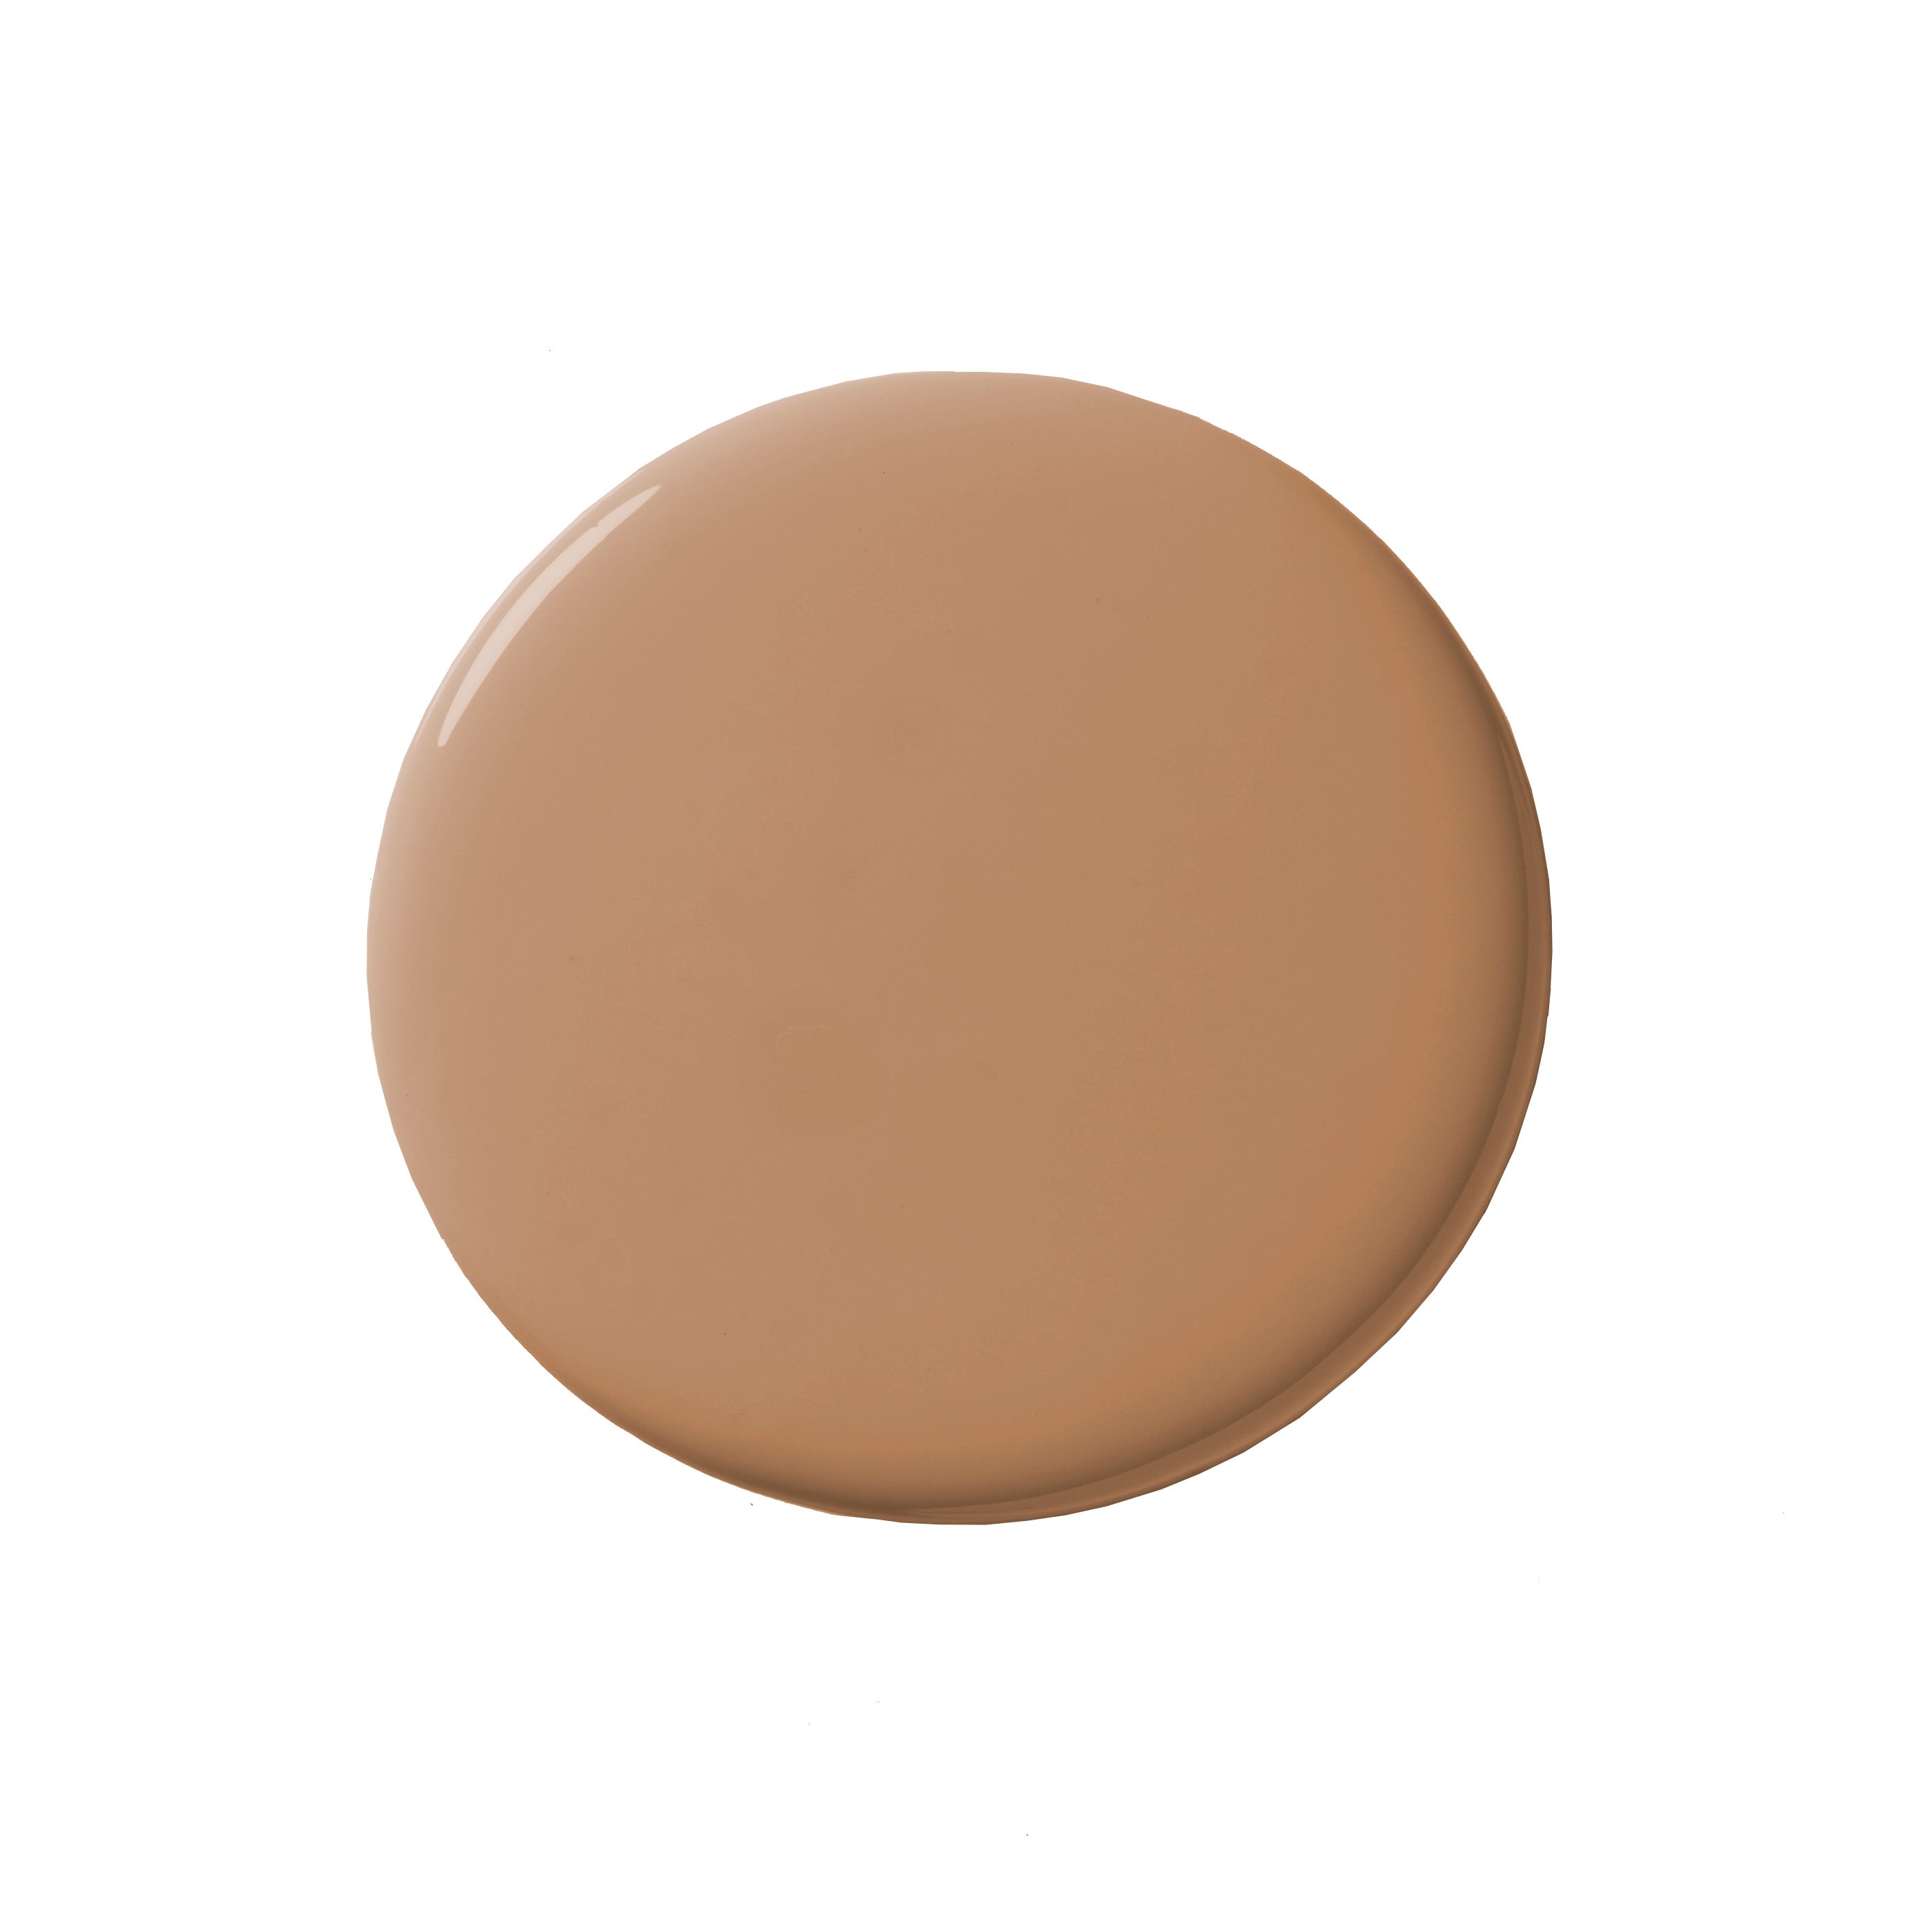 You Might Not Think of Terracotta for a Kid’s Room—But These 6 Desert Shades Rock